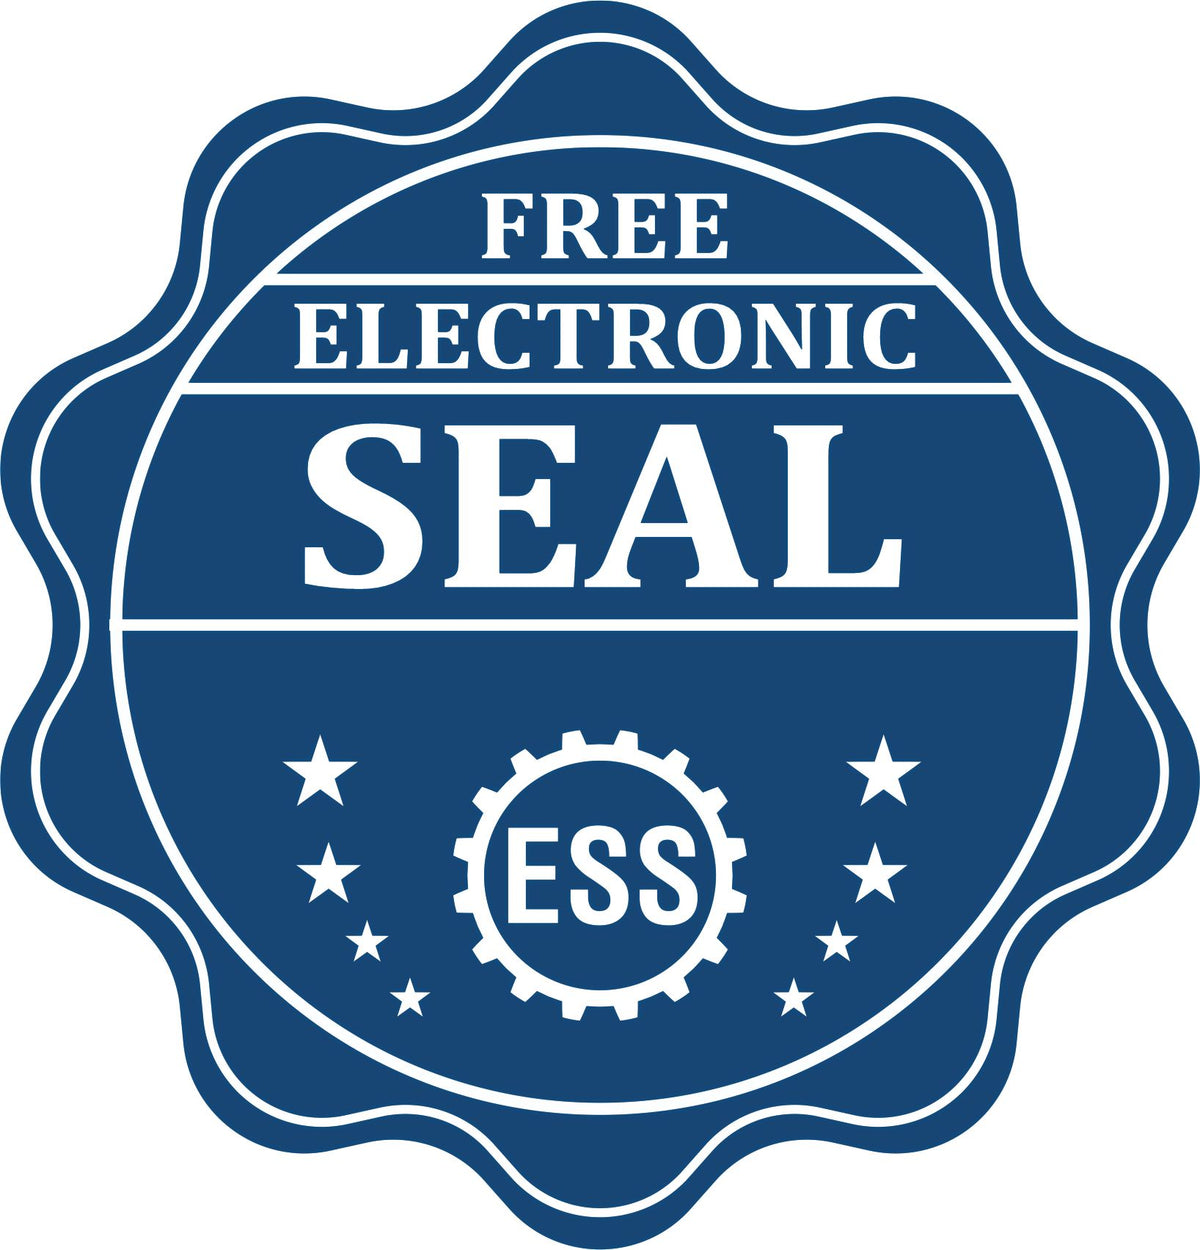 A badge showing a free electronic seal for the Super Slim Arkansas Notary Public Stamp with stars and the ESS gear on the emblem.